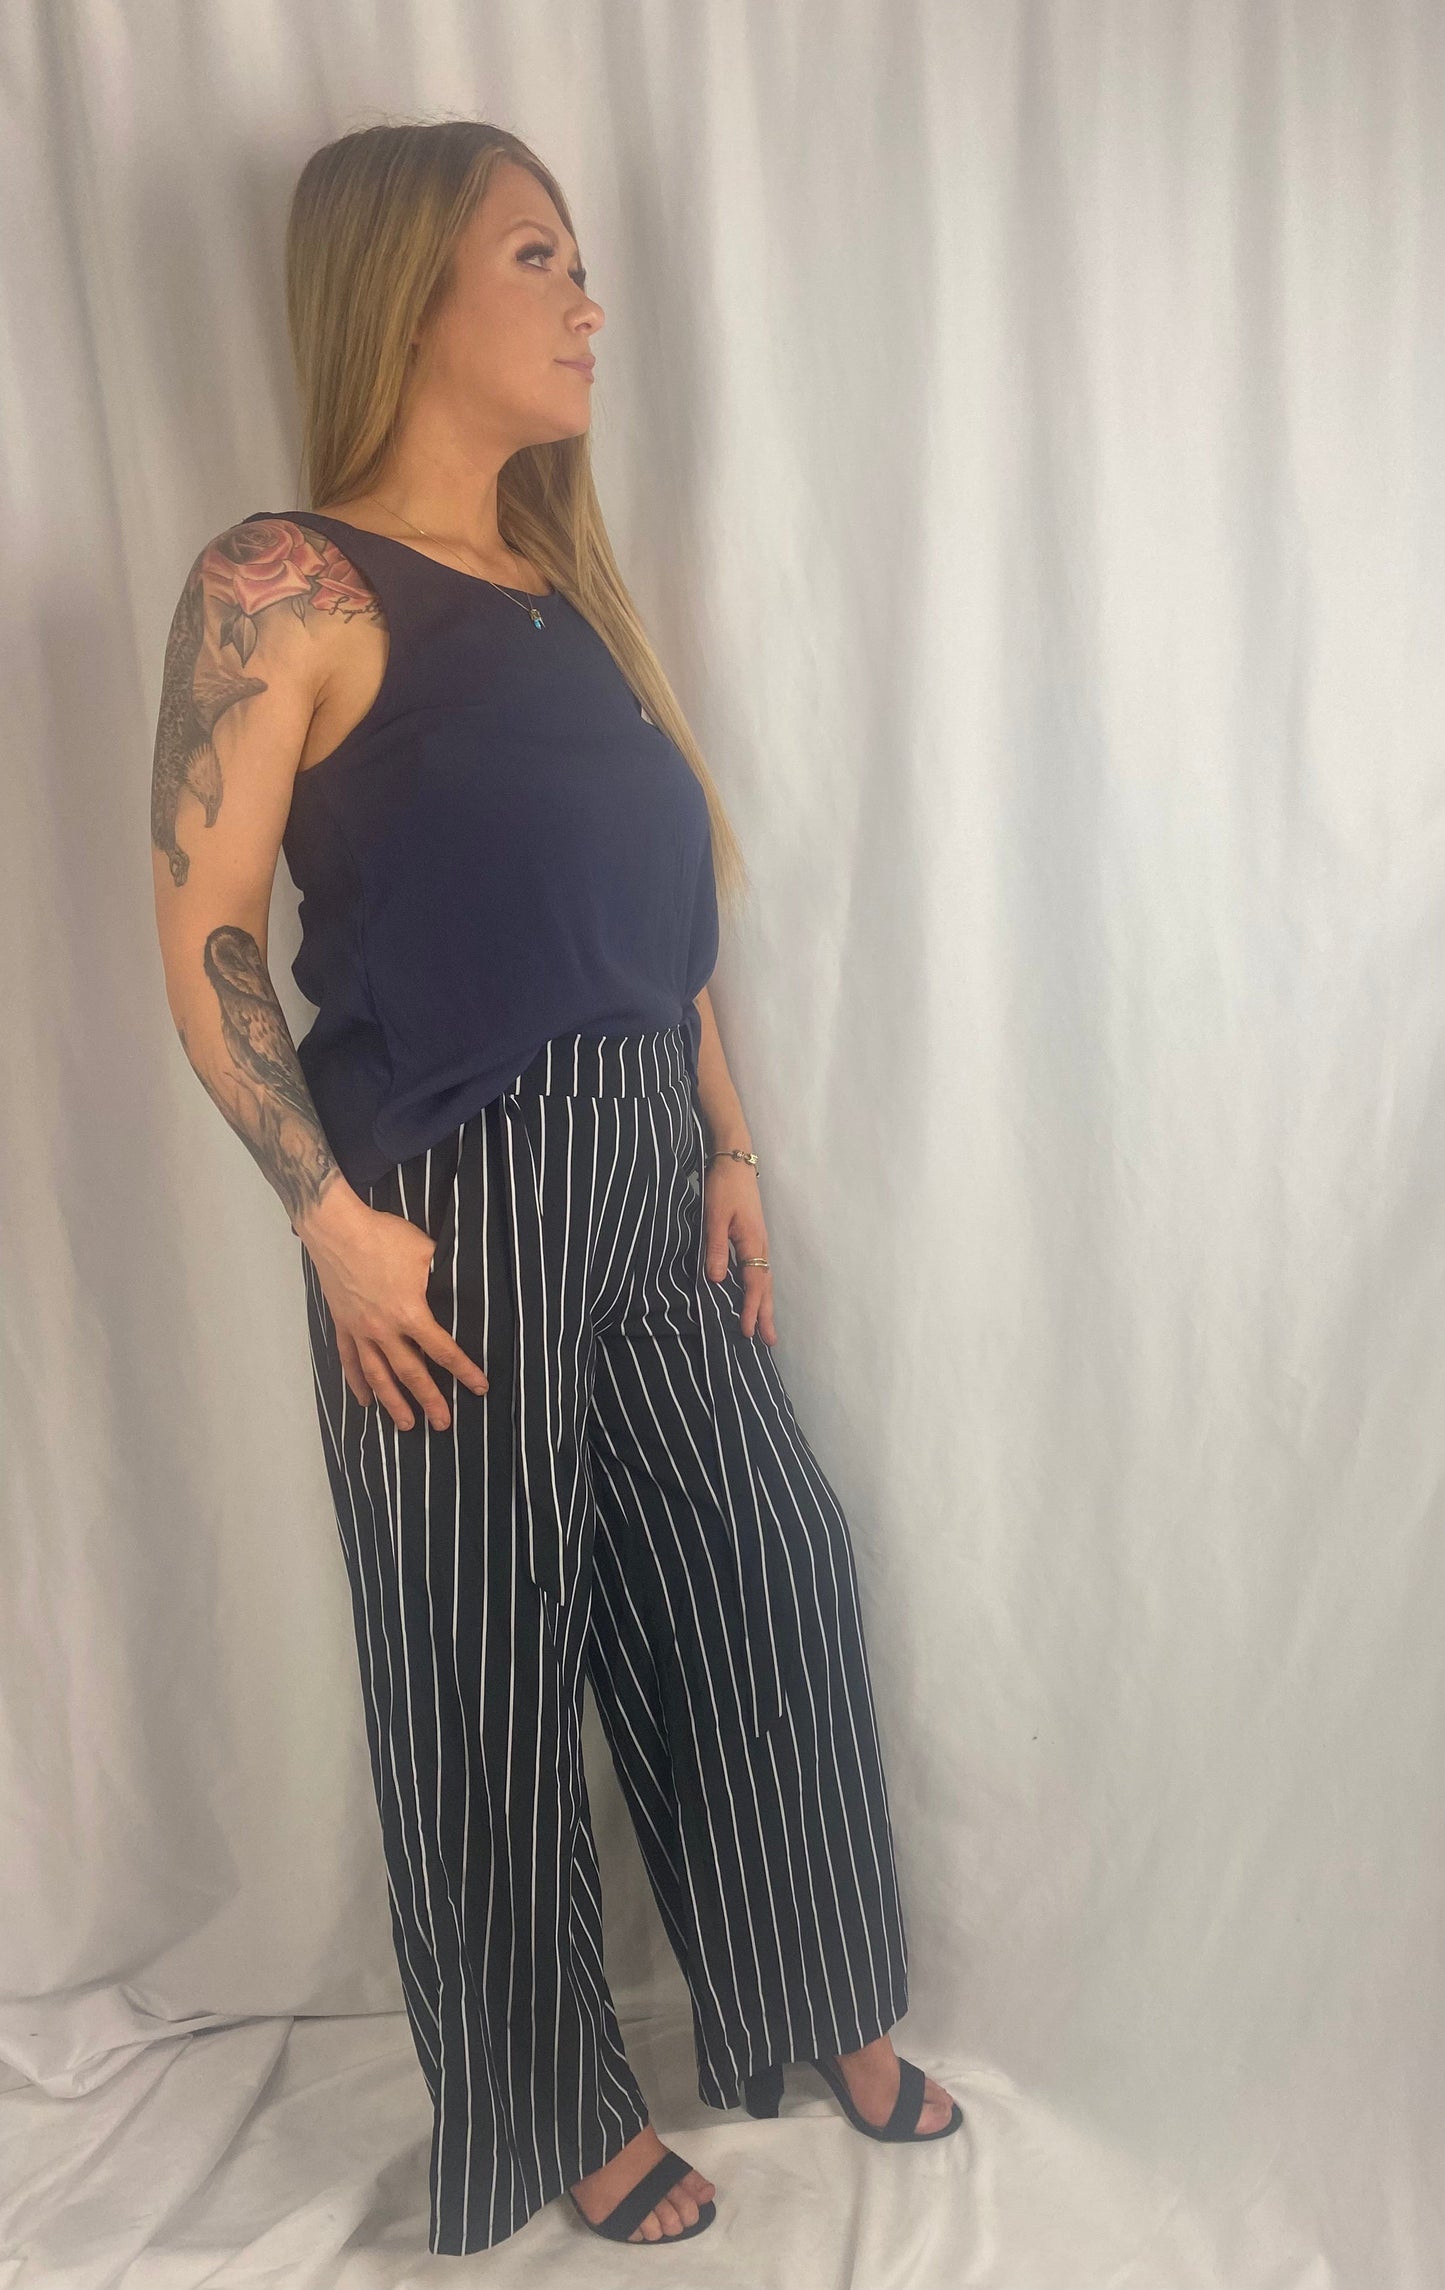 DEL Black and white stripe full Length High Waisted Pants Pants AambersGoodiesxx 